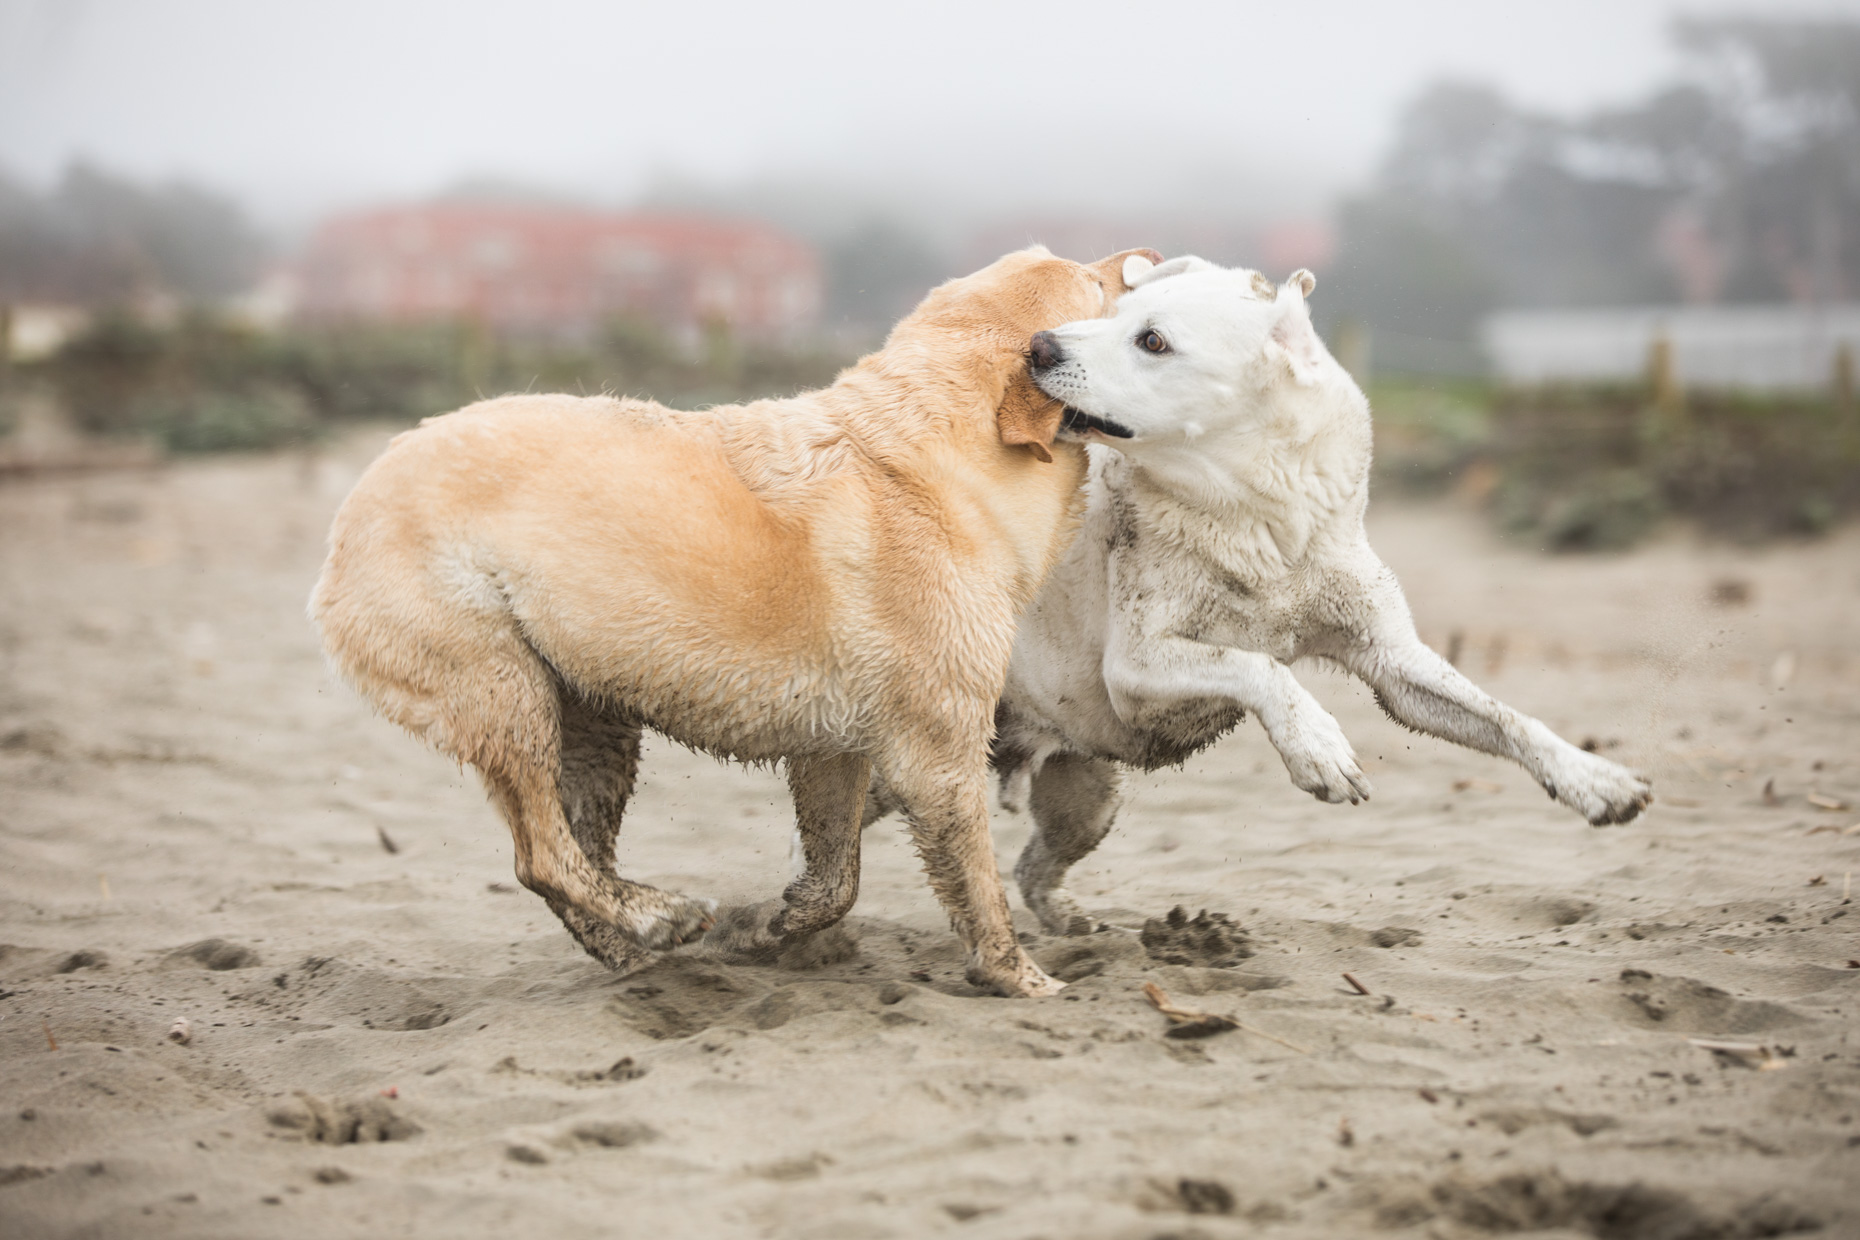 A White Dog Grabbing the Ear of a Yellow Dog While Playing on a Beach